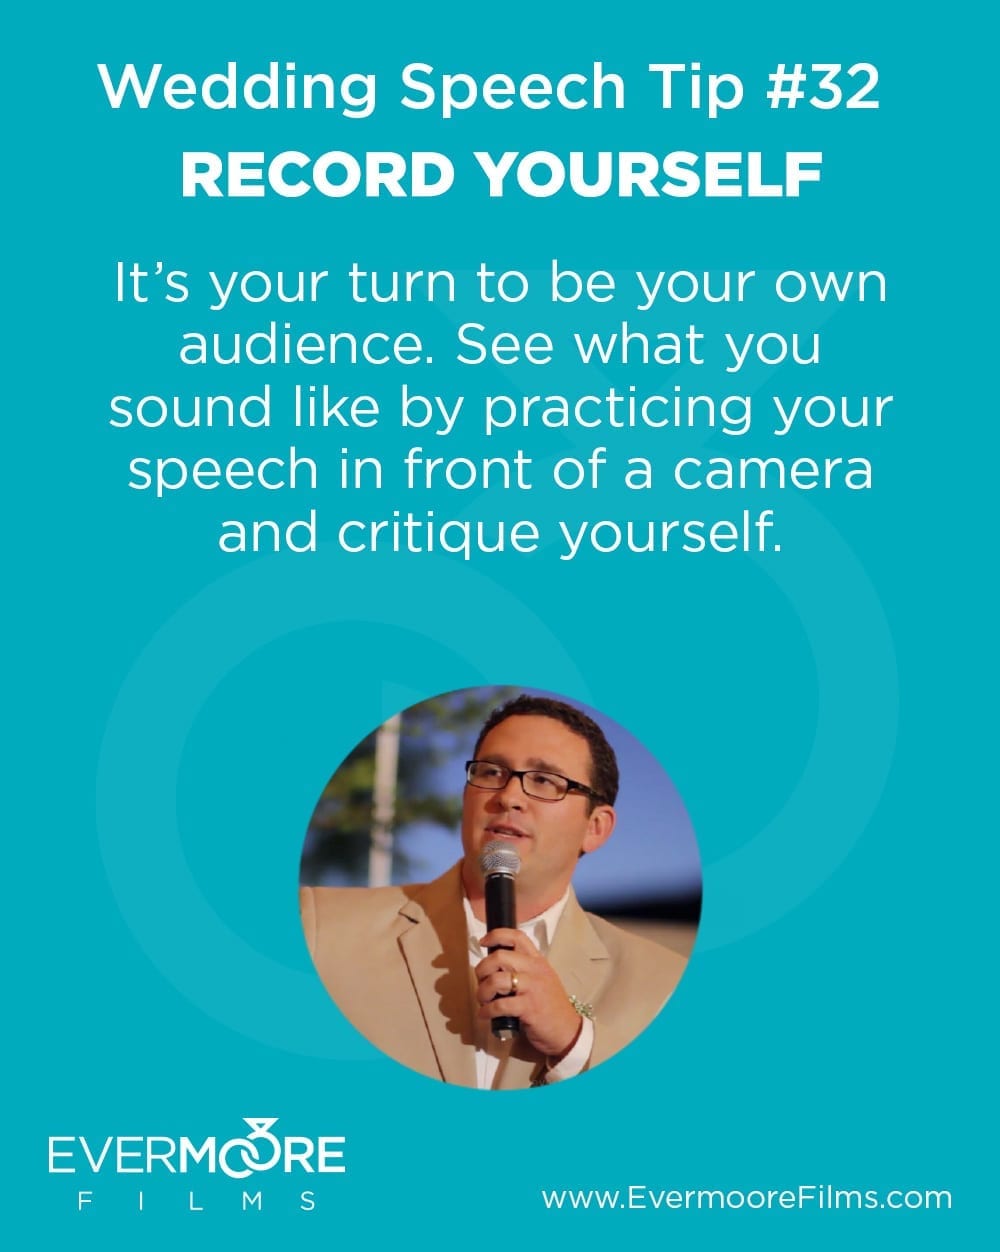 Record Yourself | Wedding Speech Tip #32 | Evermoore Films | It's your turn to be your own audience. See what you sound like by practicing your speech in front of a camera and critique yourself.